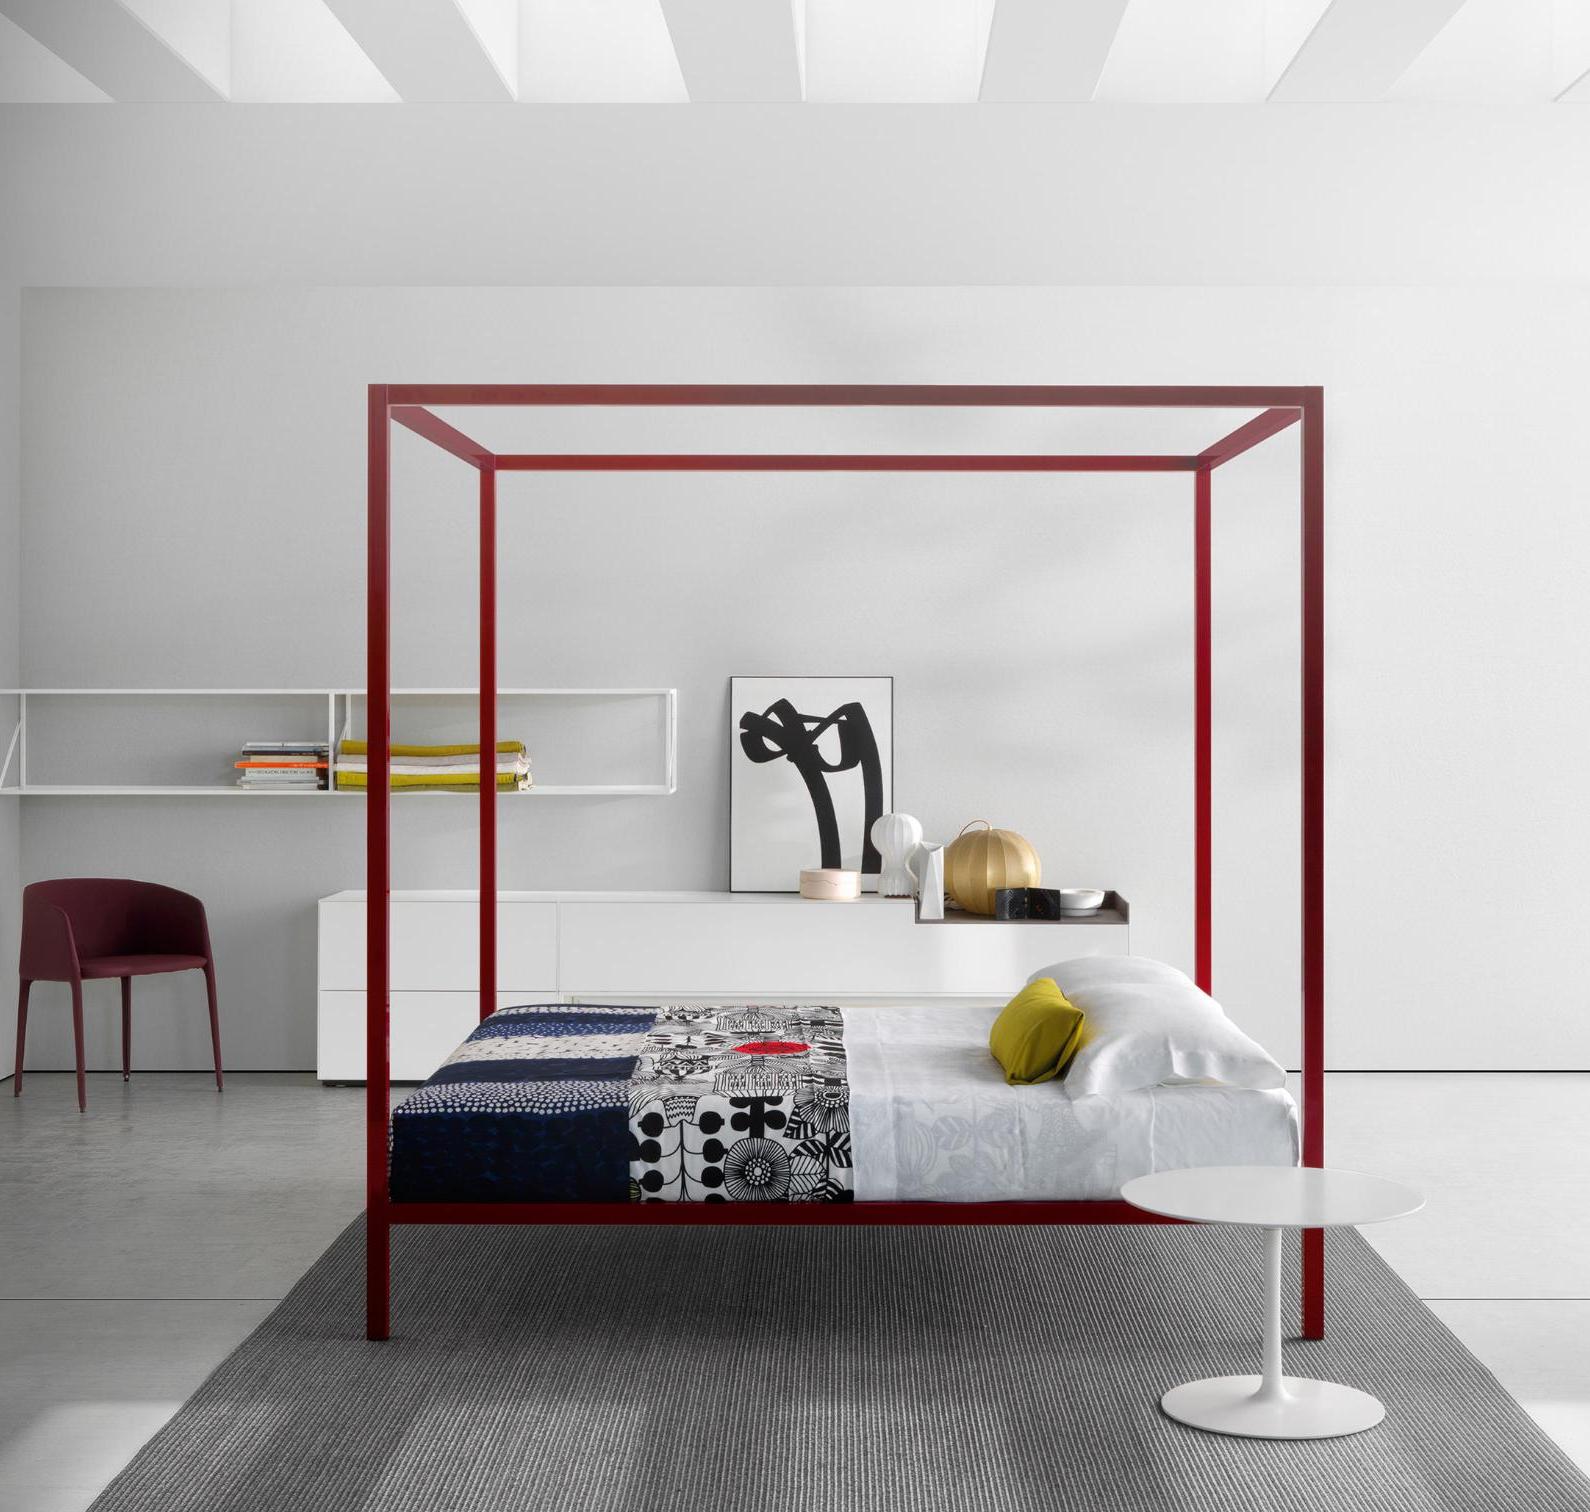 Luxurious Aluminium Canopy Bed Italian Style ☞ Structure: Gloss Painted White X060 ☞ Dimensions: 210 x 210 cm